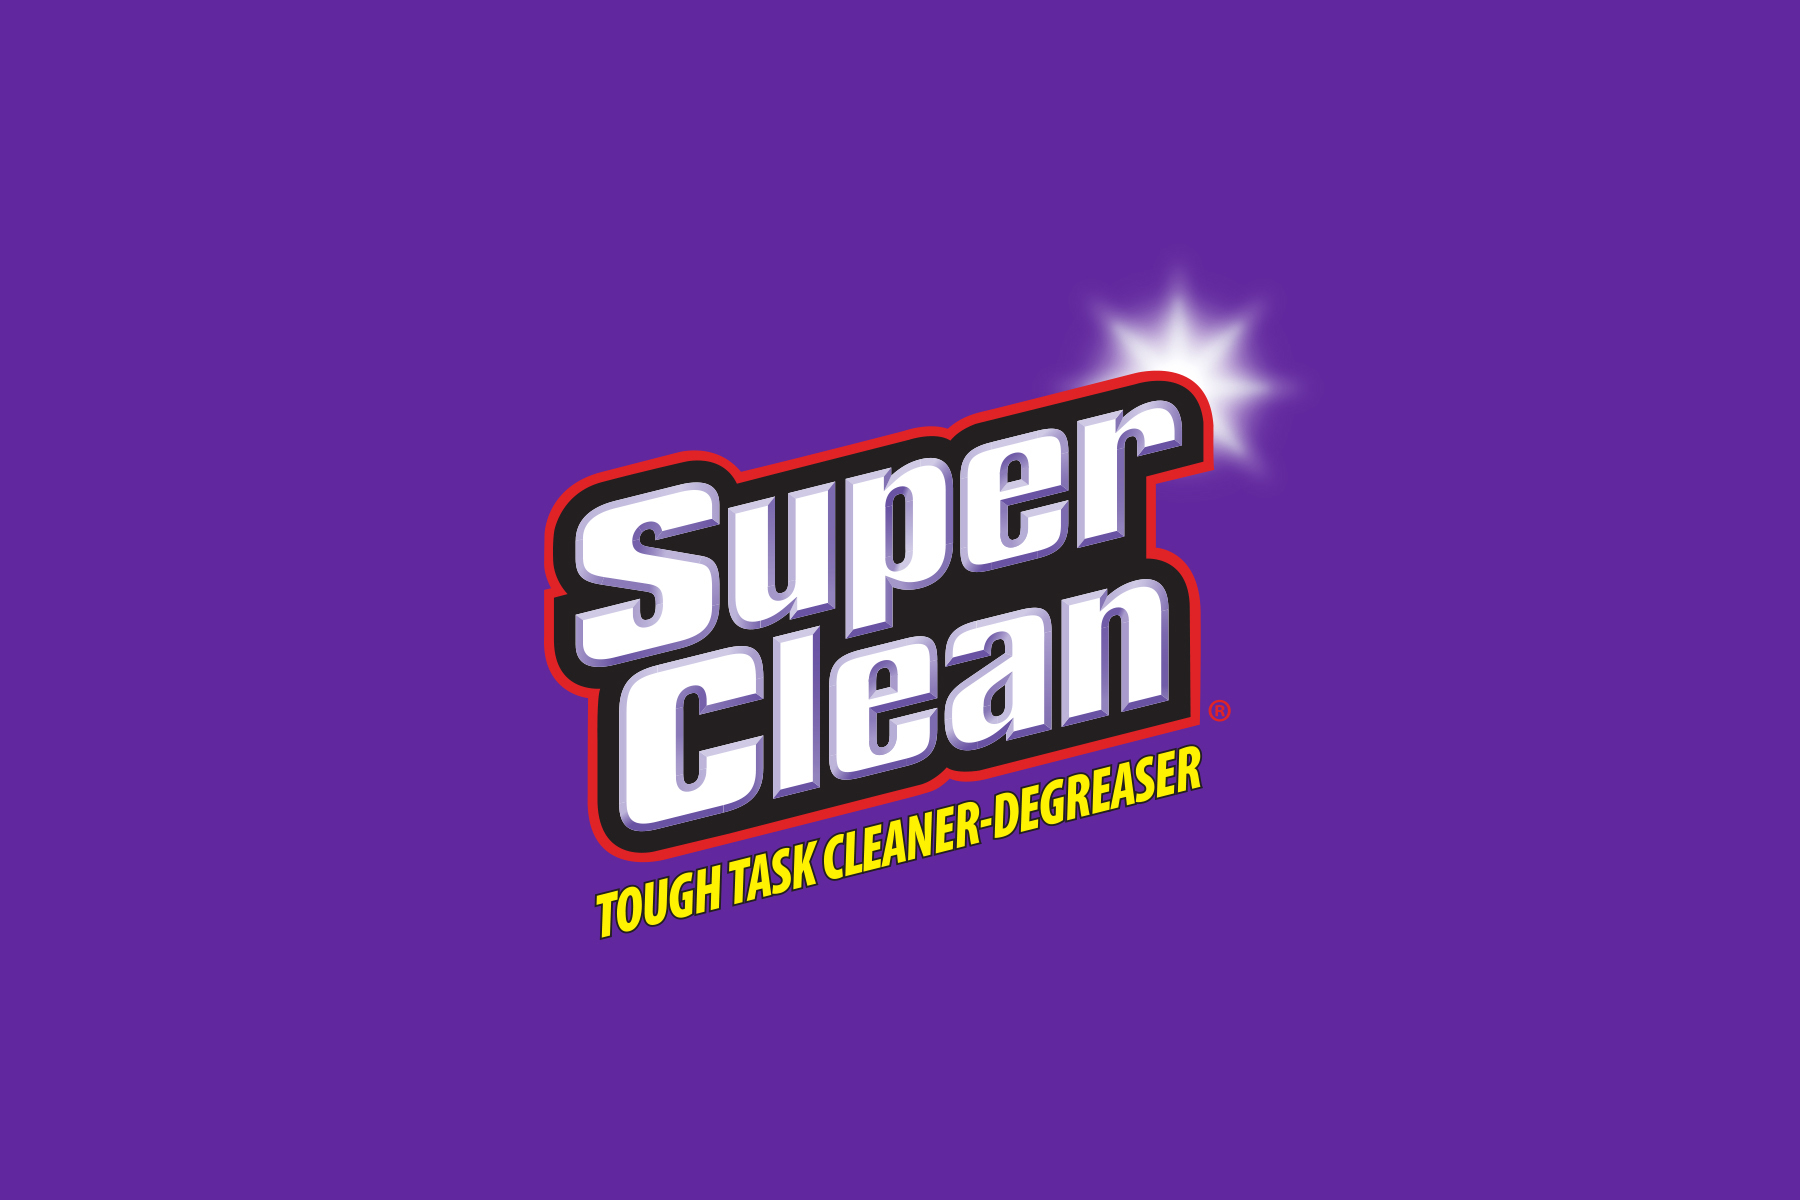 https://superclean.com/wp-content/uploads/2017/05/SuperClean-stacked-color-tagline-on-purple.jpg